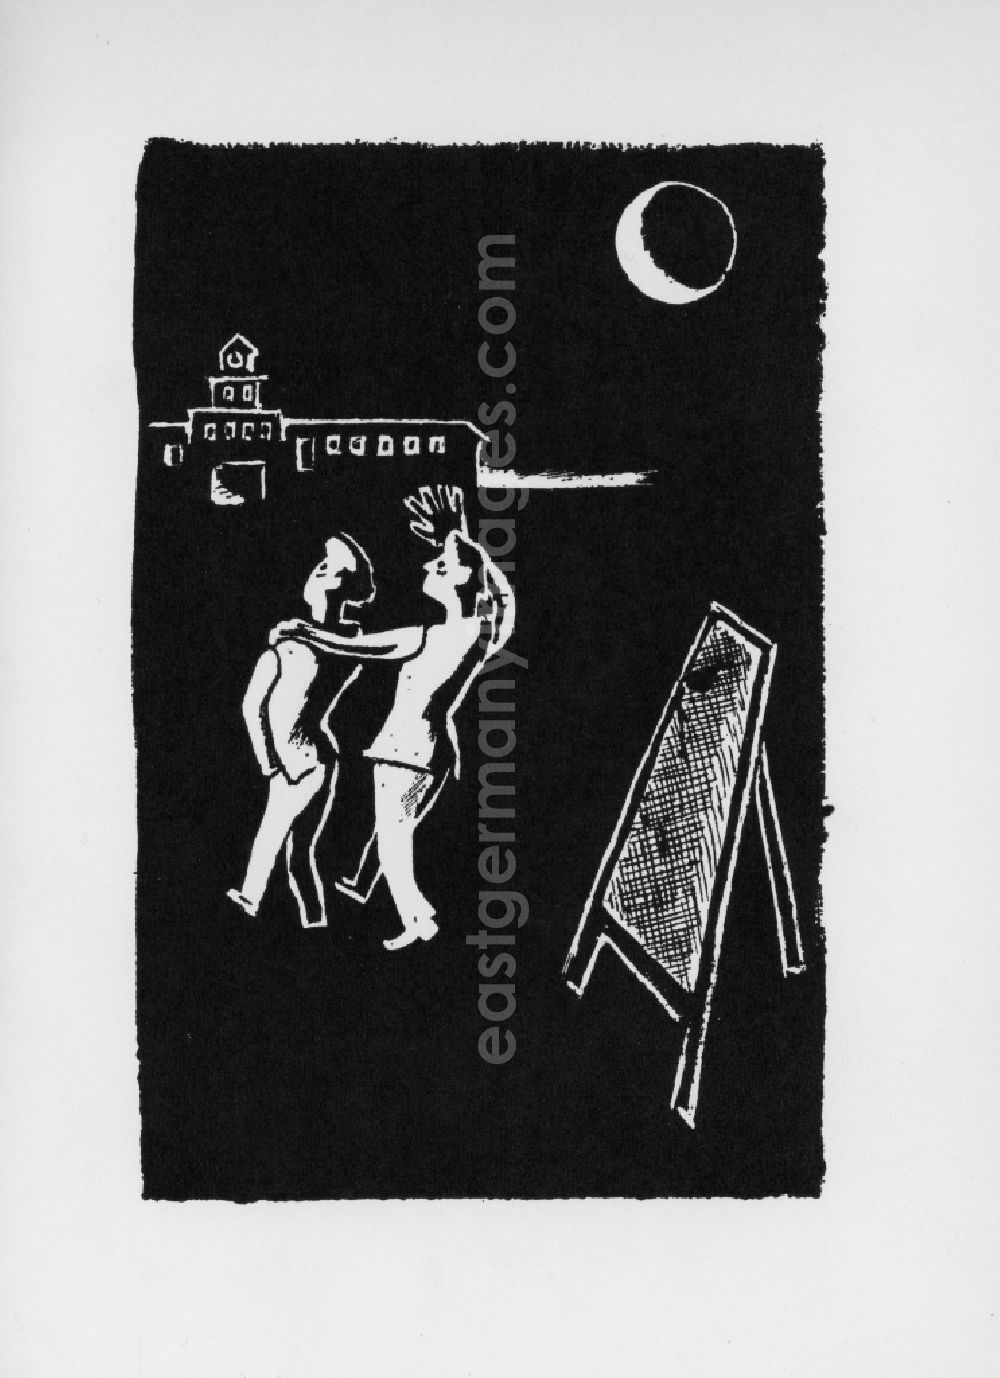 GDR picture archive: Berlin - Woodcut Die Zukunft by Herbert Sandberg. Two men walk in the moonlight together towards the gate to the Buchenwald Concentration Camp. One puts his left arm around the other and waving his right arm towards the gate. Next to them is a soil sieve